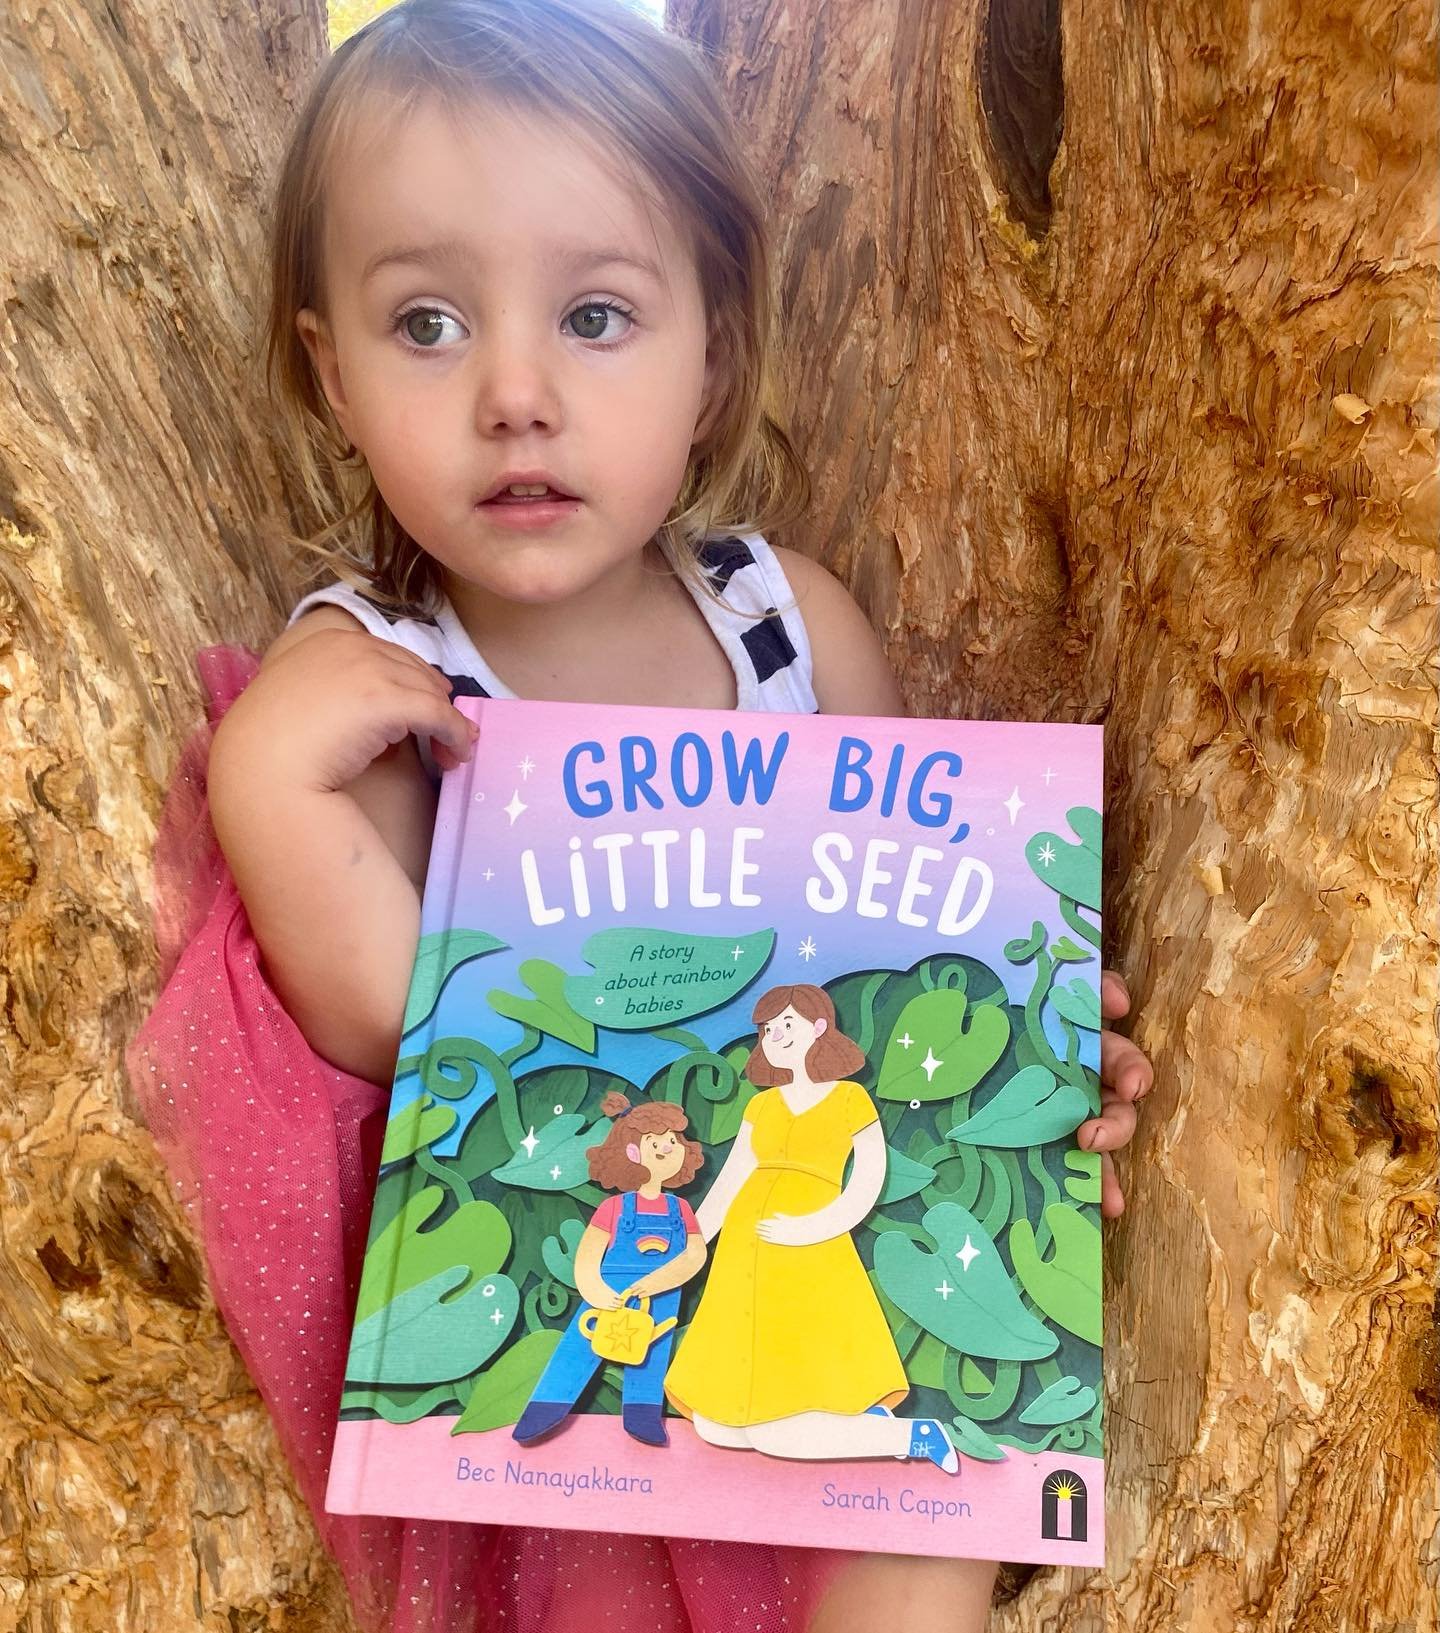 Grow Big Little Seed by @becnanayakkara, illustrated by @eyepicturedthis burst into the world brave, bright and beautiful. ✨

This hopeful story of love, loss and love wraps itself around my heart in special ways. Pictured here with my own longed-for